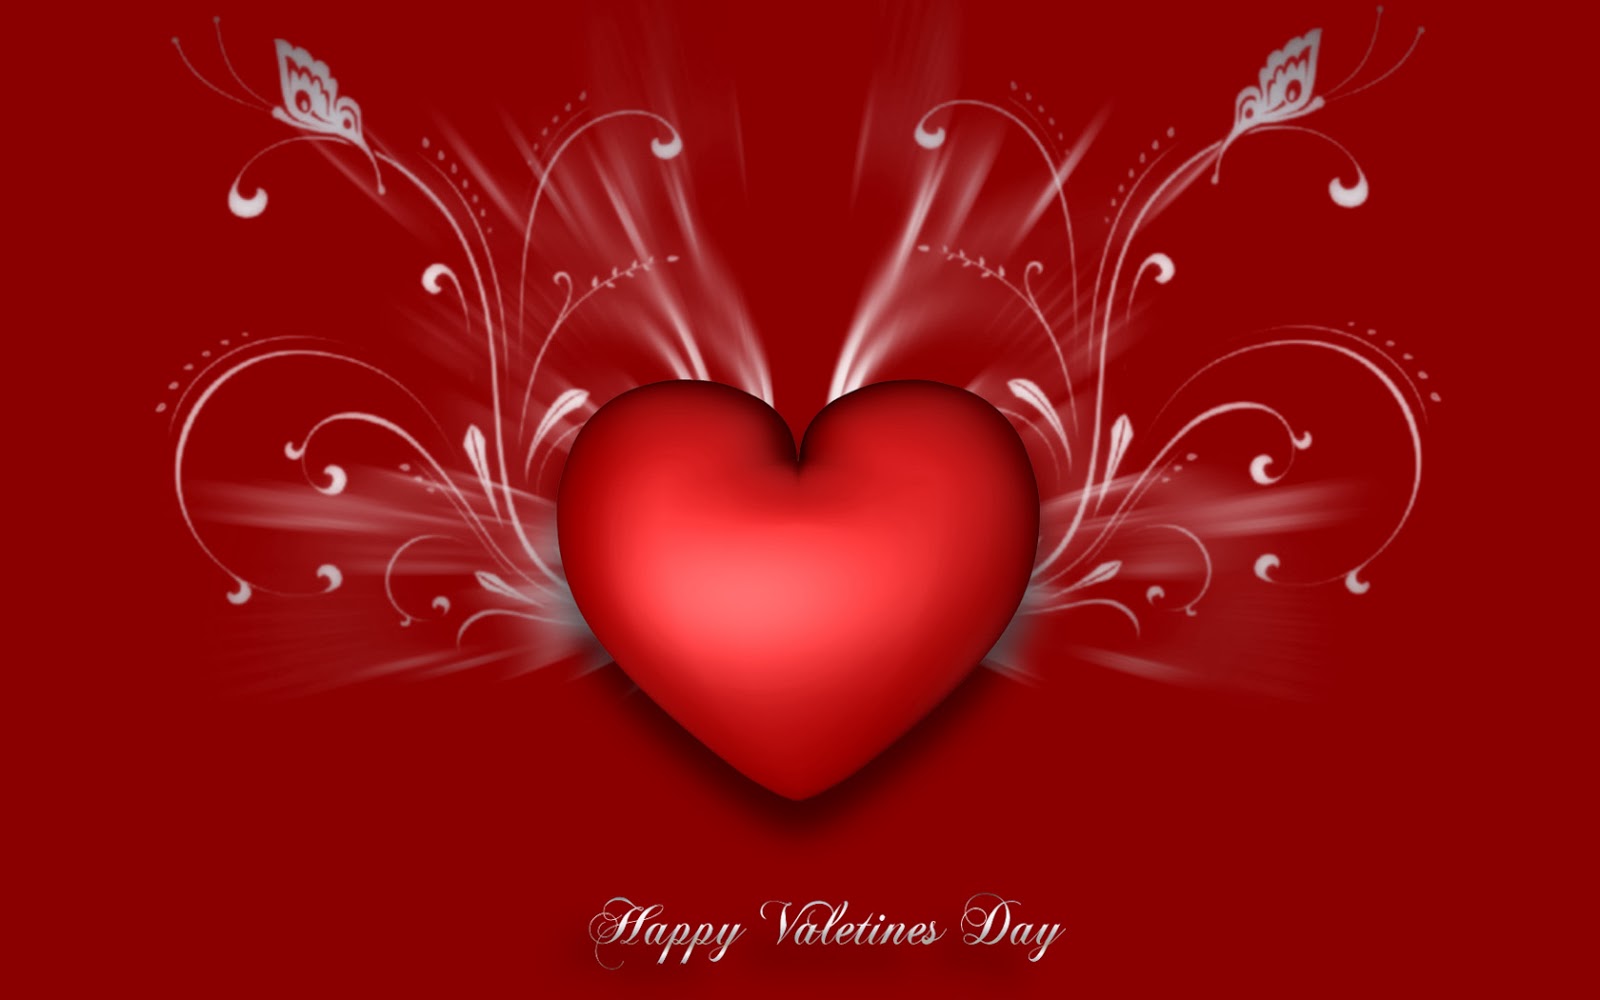 Happy Valentines Day Wallpapers Free Download